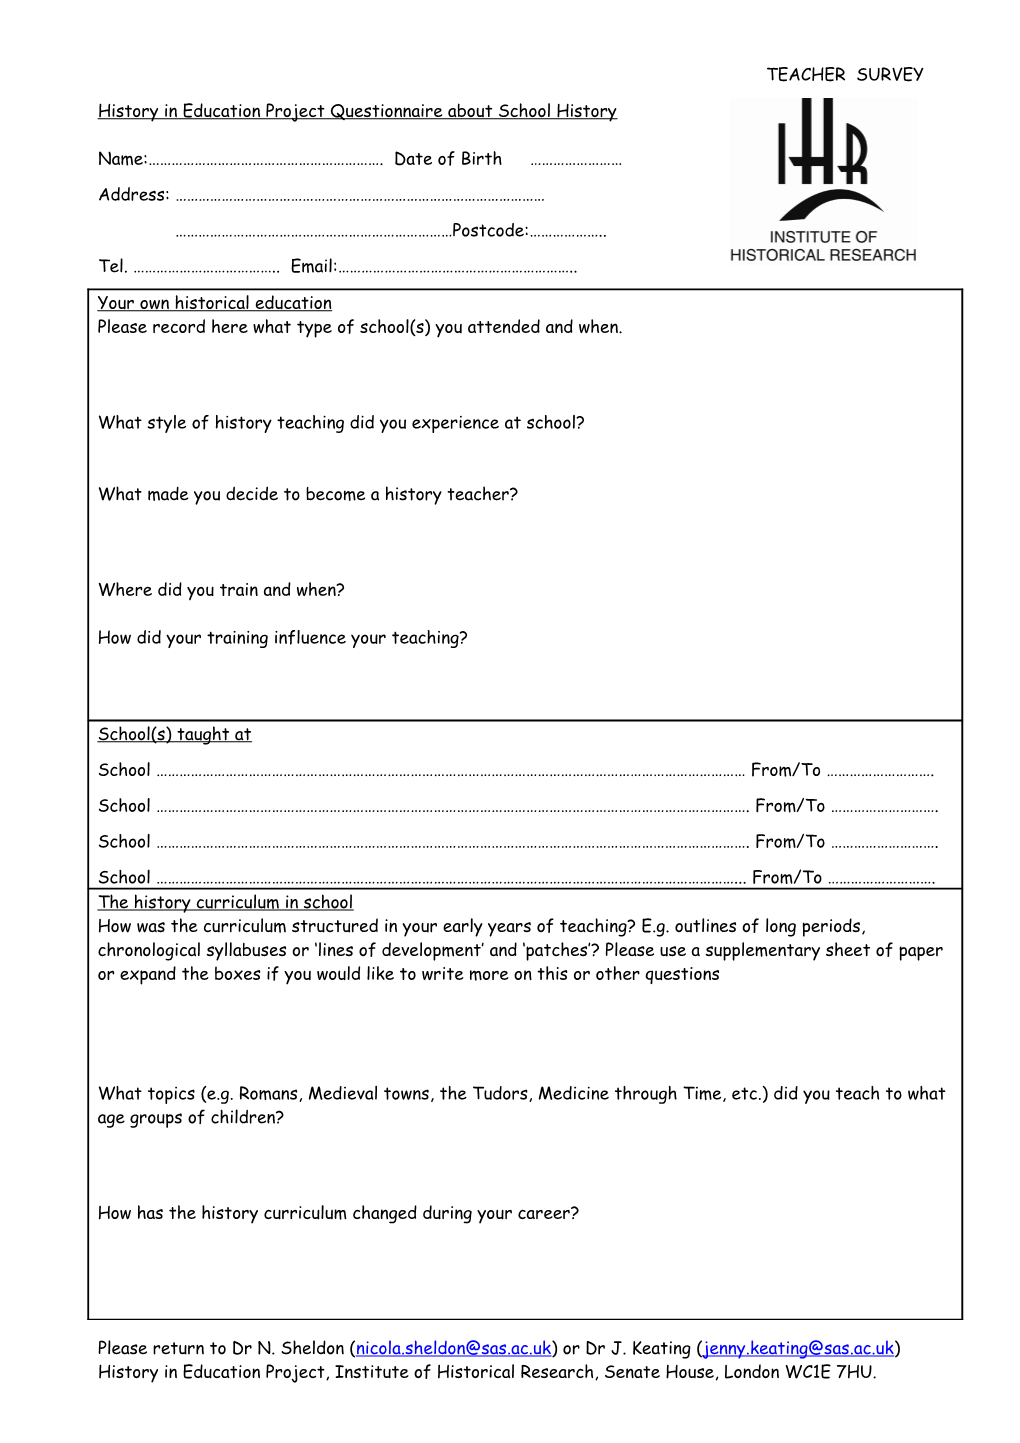 History in Education Project Questionnaire About School History